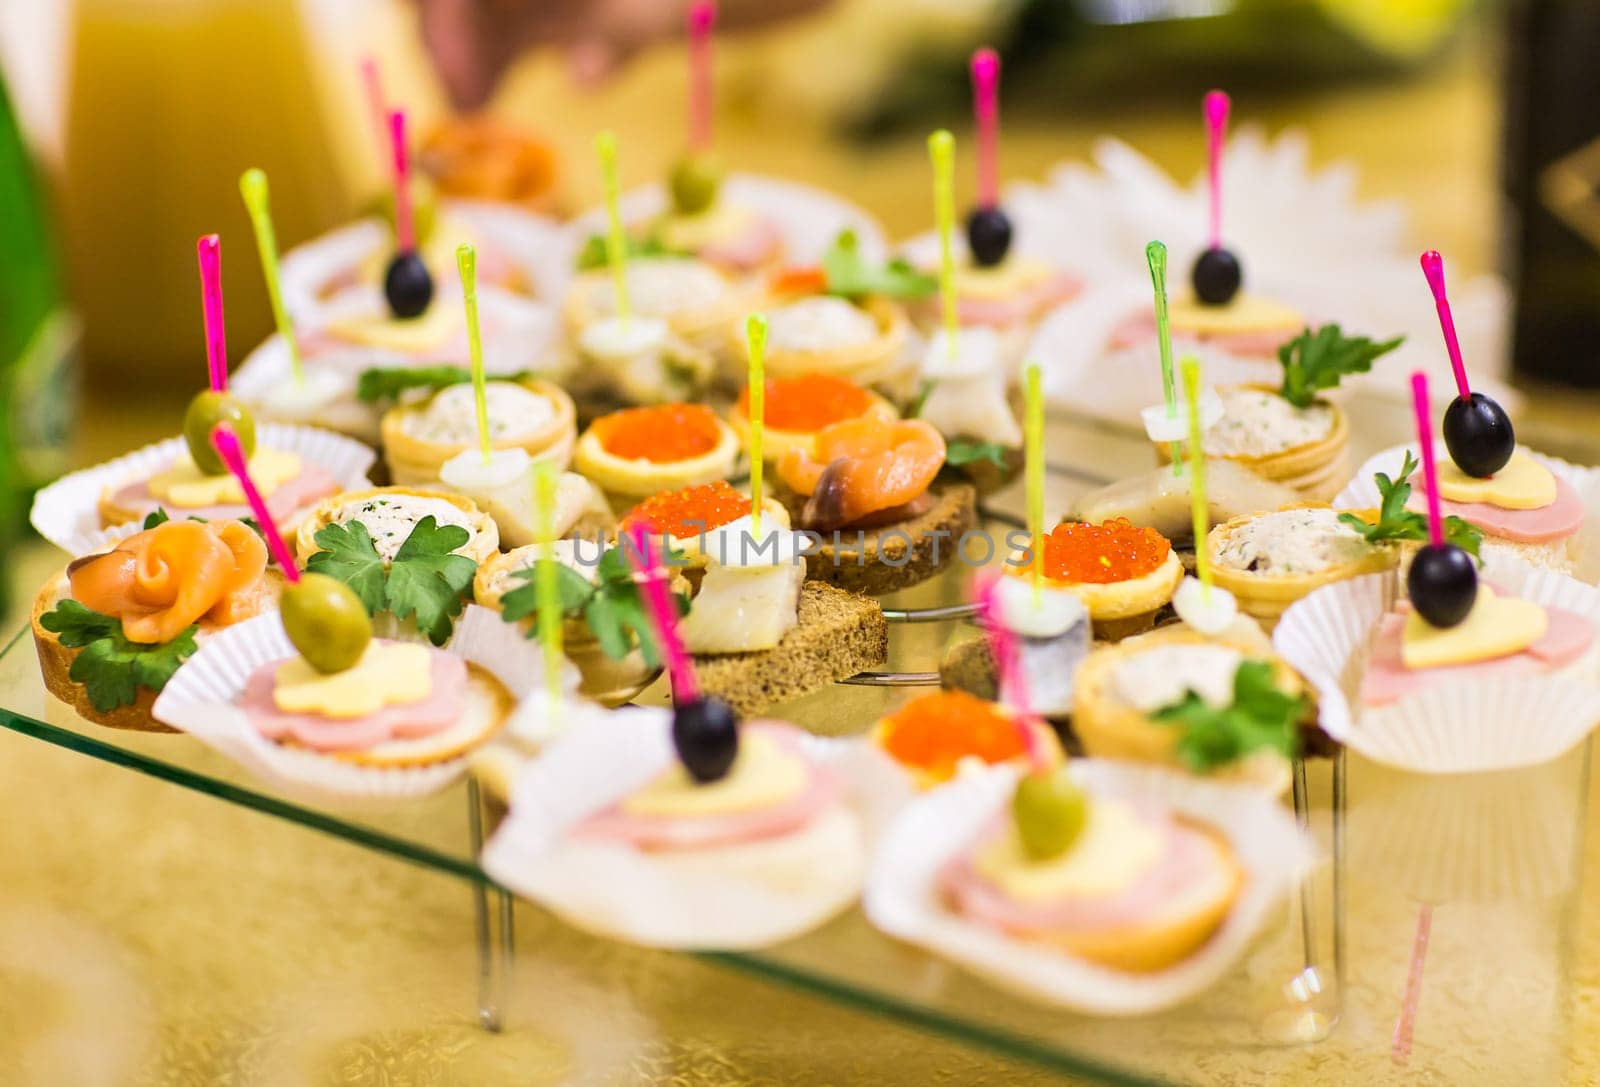 Canapes and appetizers by Satura86